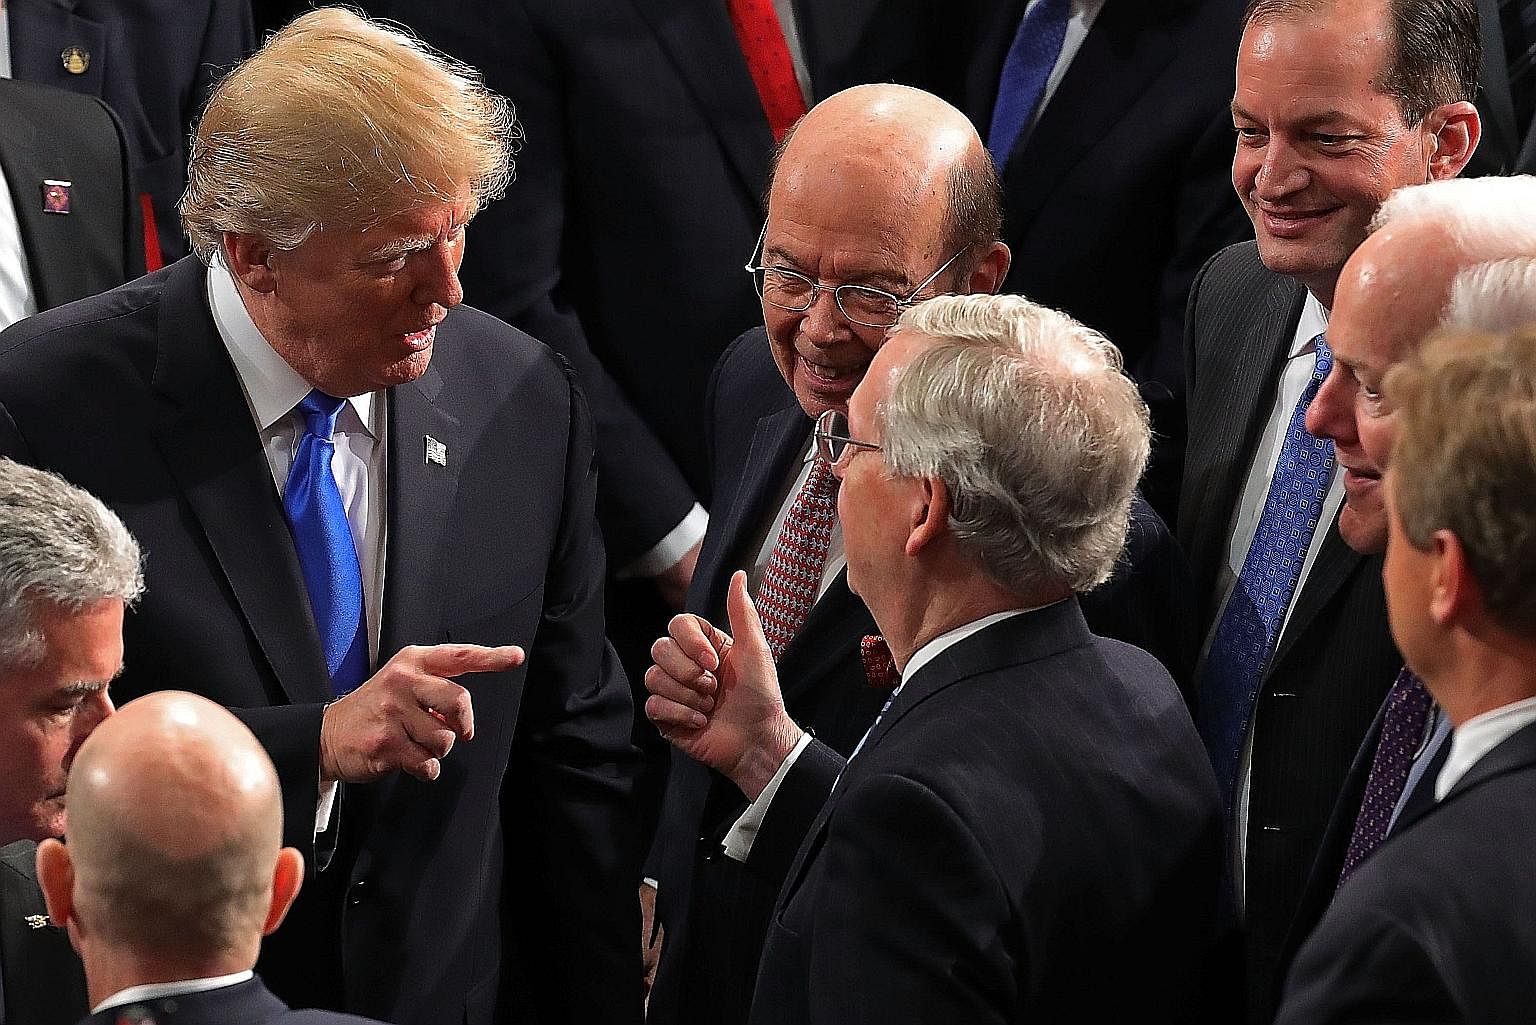 US President Donald Trump with top Republicans following his State of the Union address last month. Voices from within the party have been warning him against following through on his tough talk on trade with China.